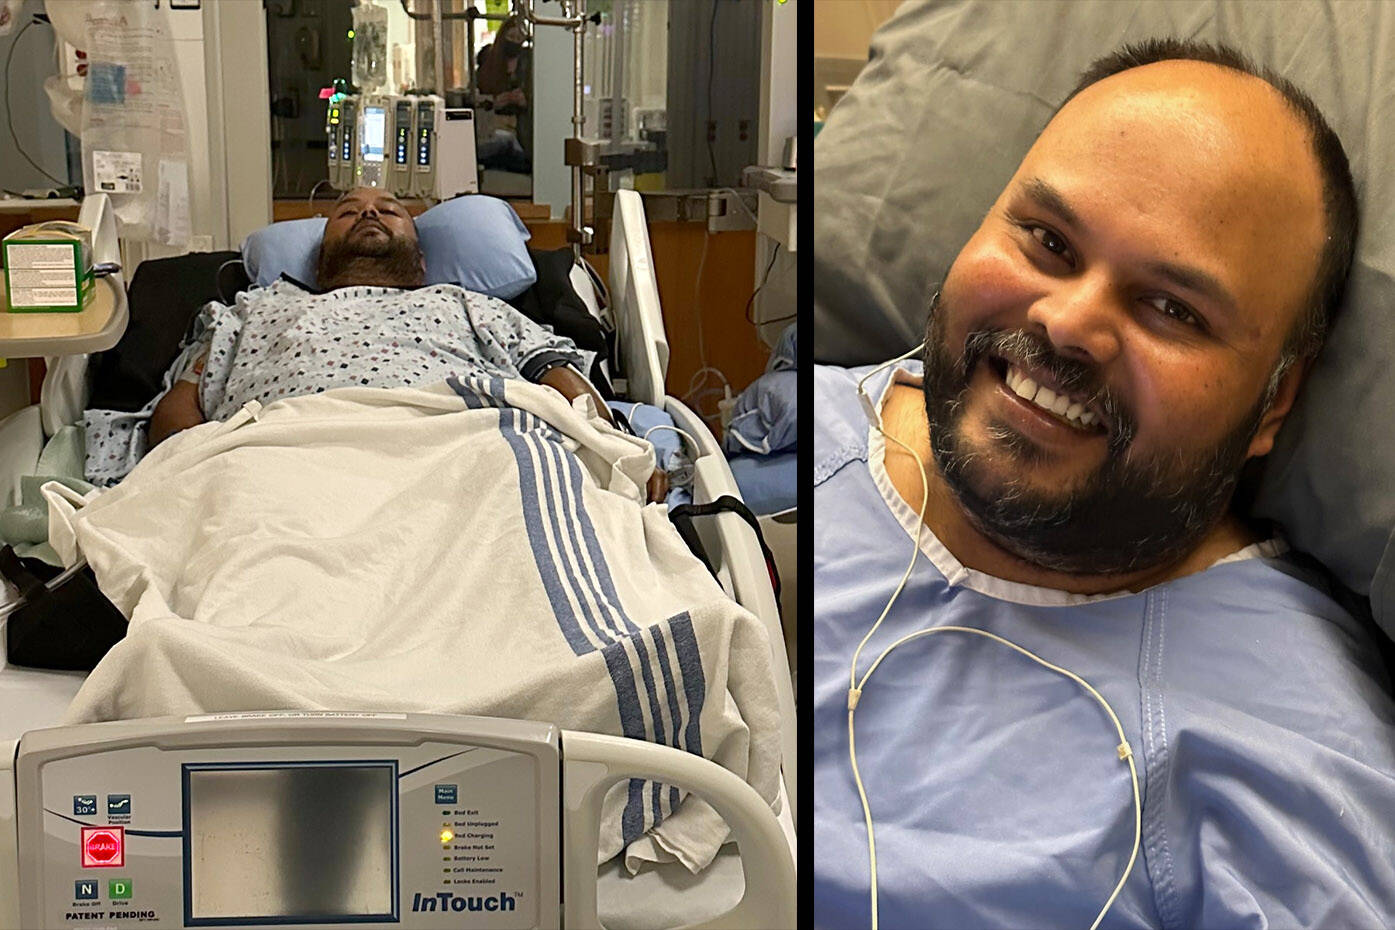 Kris Mallisetty was paralyzed from the neck down during surgery on his spine on Jan. 27. Because he doesn’t qualify for Persons With Disability funding, a friend has set up a fundraiser to help pay for the costs of making his home wheelchair-accessible. (Leah Gray photo)